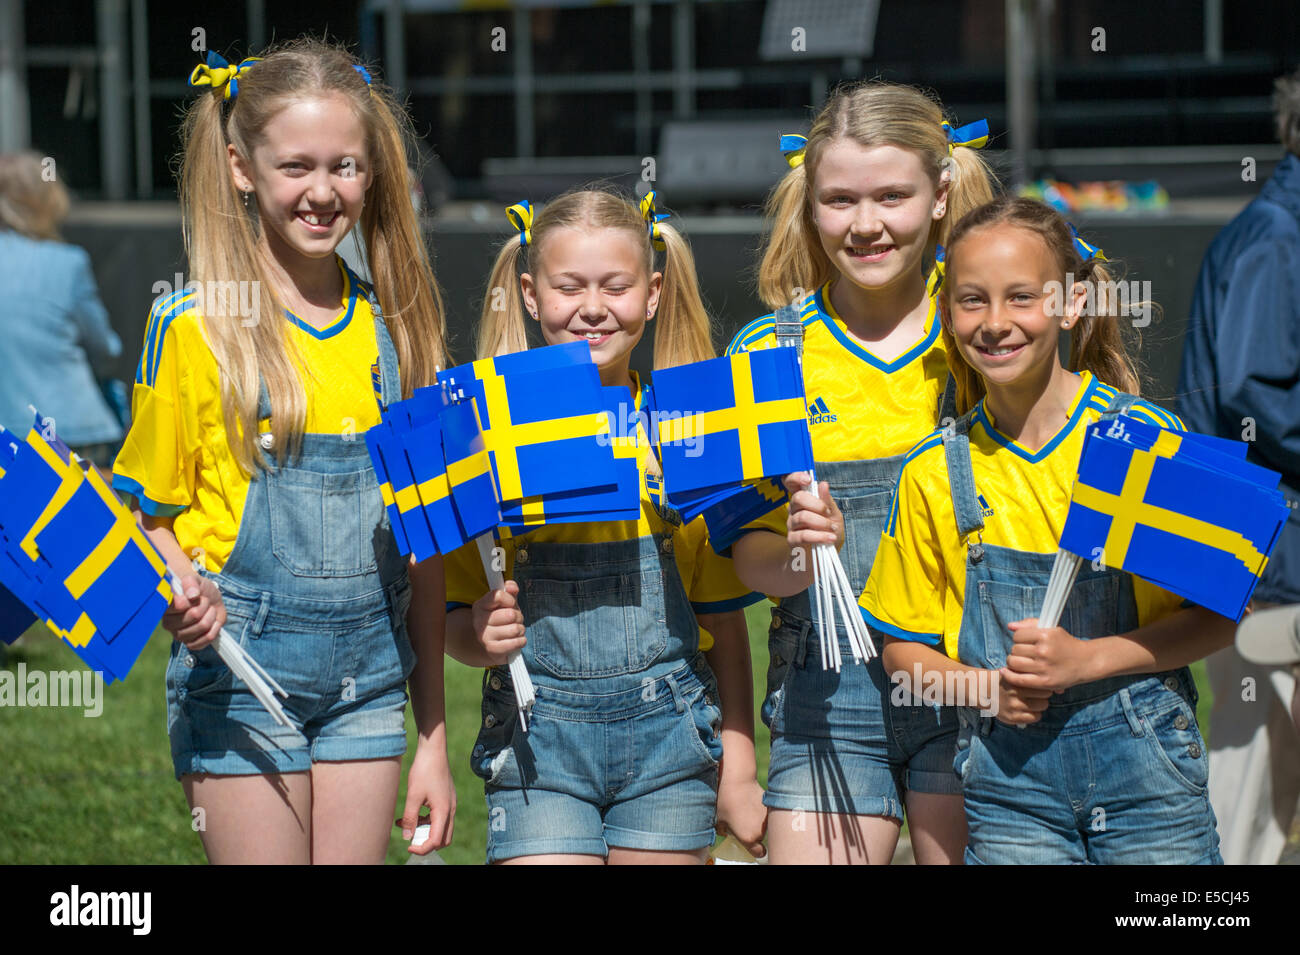 Smiling girls celebrating the National day of Sweden in Norrkoping. The national day of Sweden is celebrated on June 6 annually Stock Photo